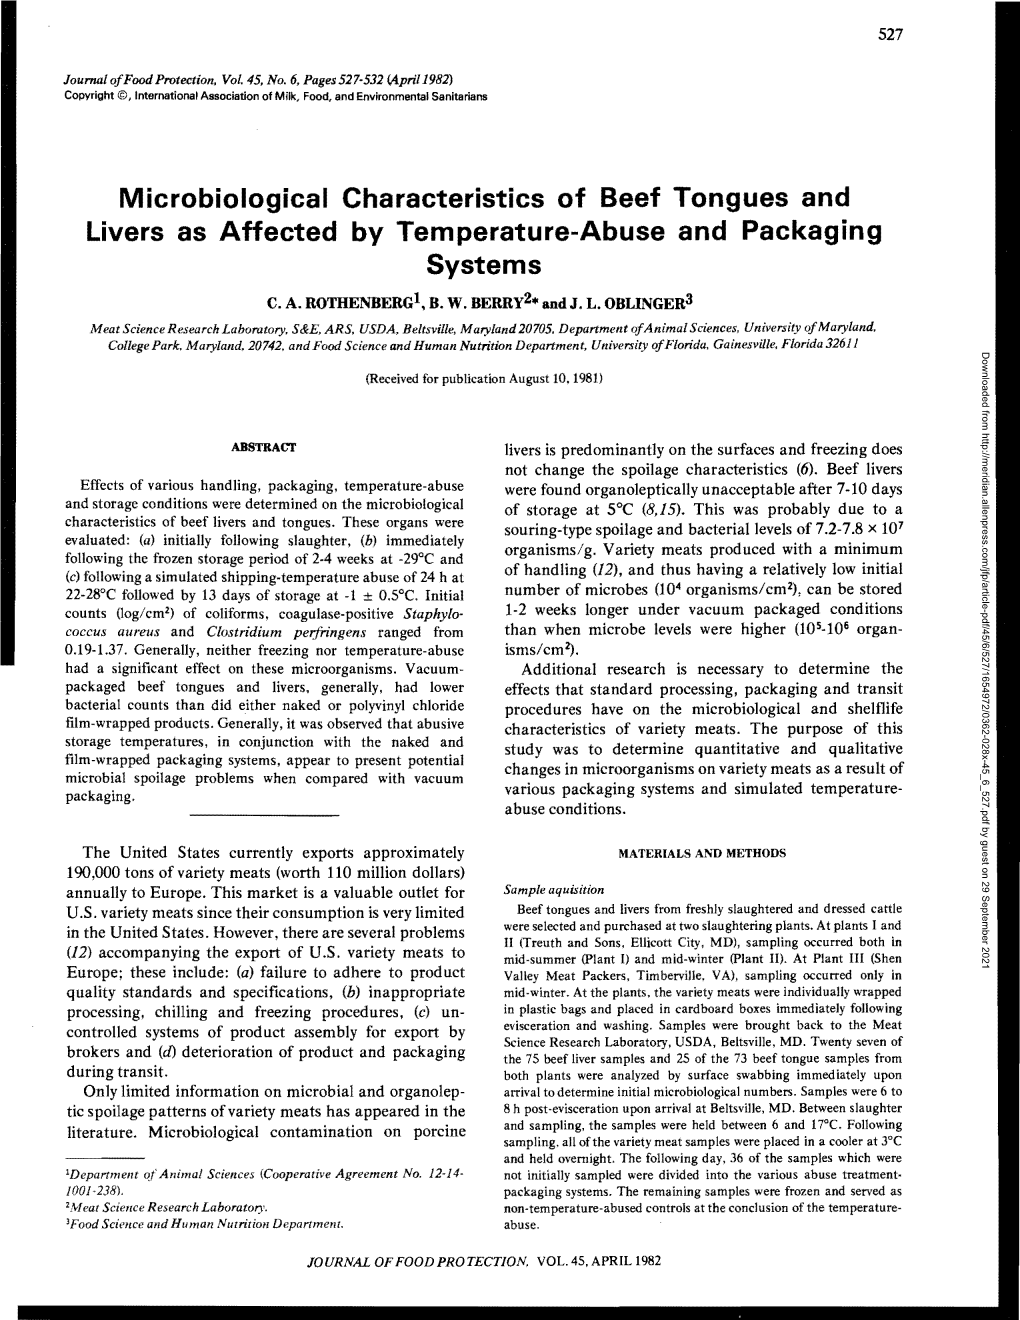 Microbiological Characteristics of Beef Tongues and Livers As Affected by Temperature-Abuse and Packaging Systems C